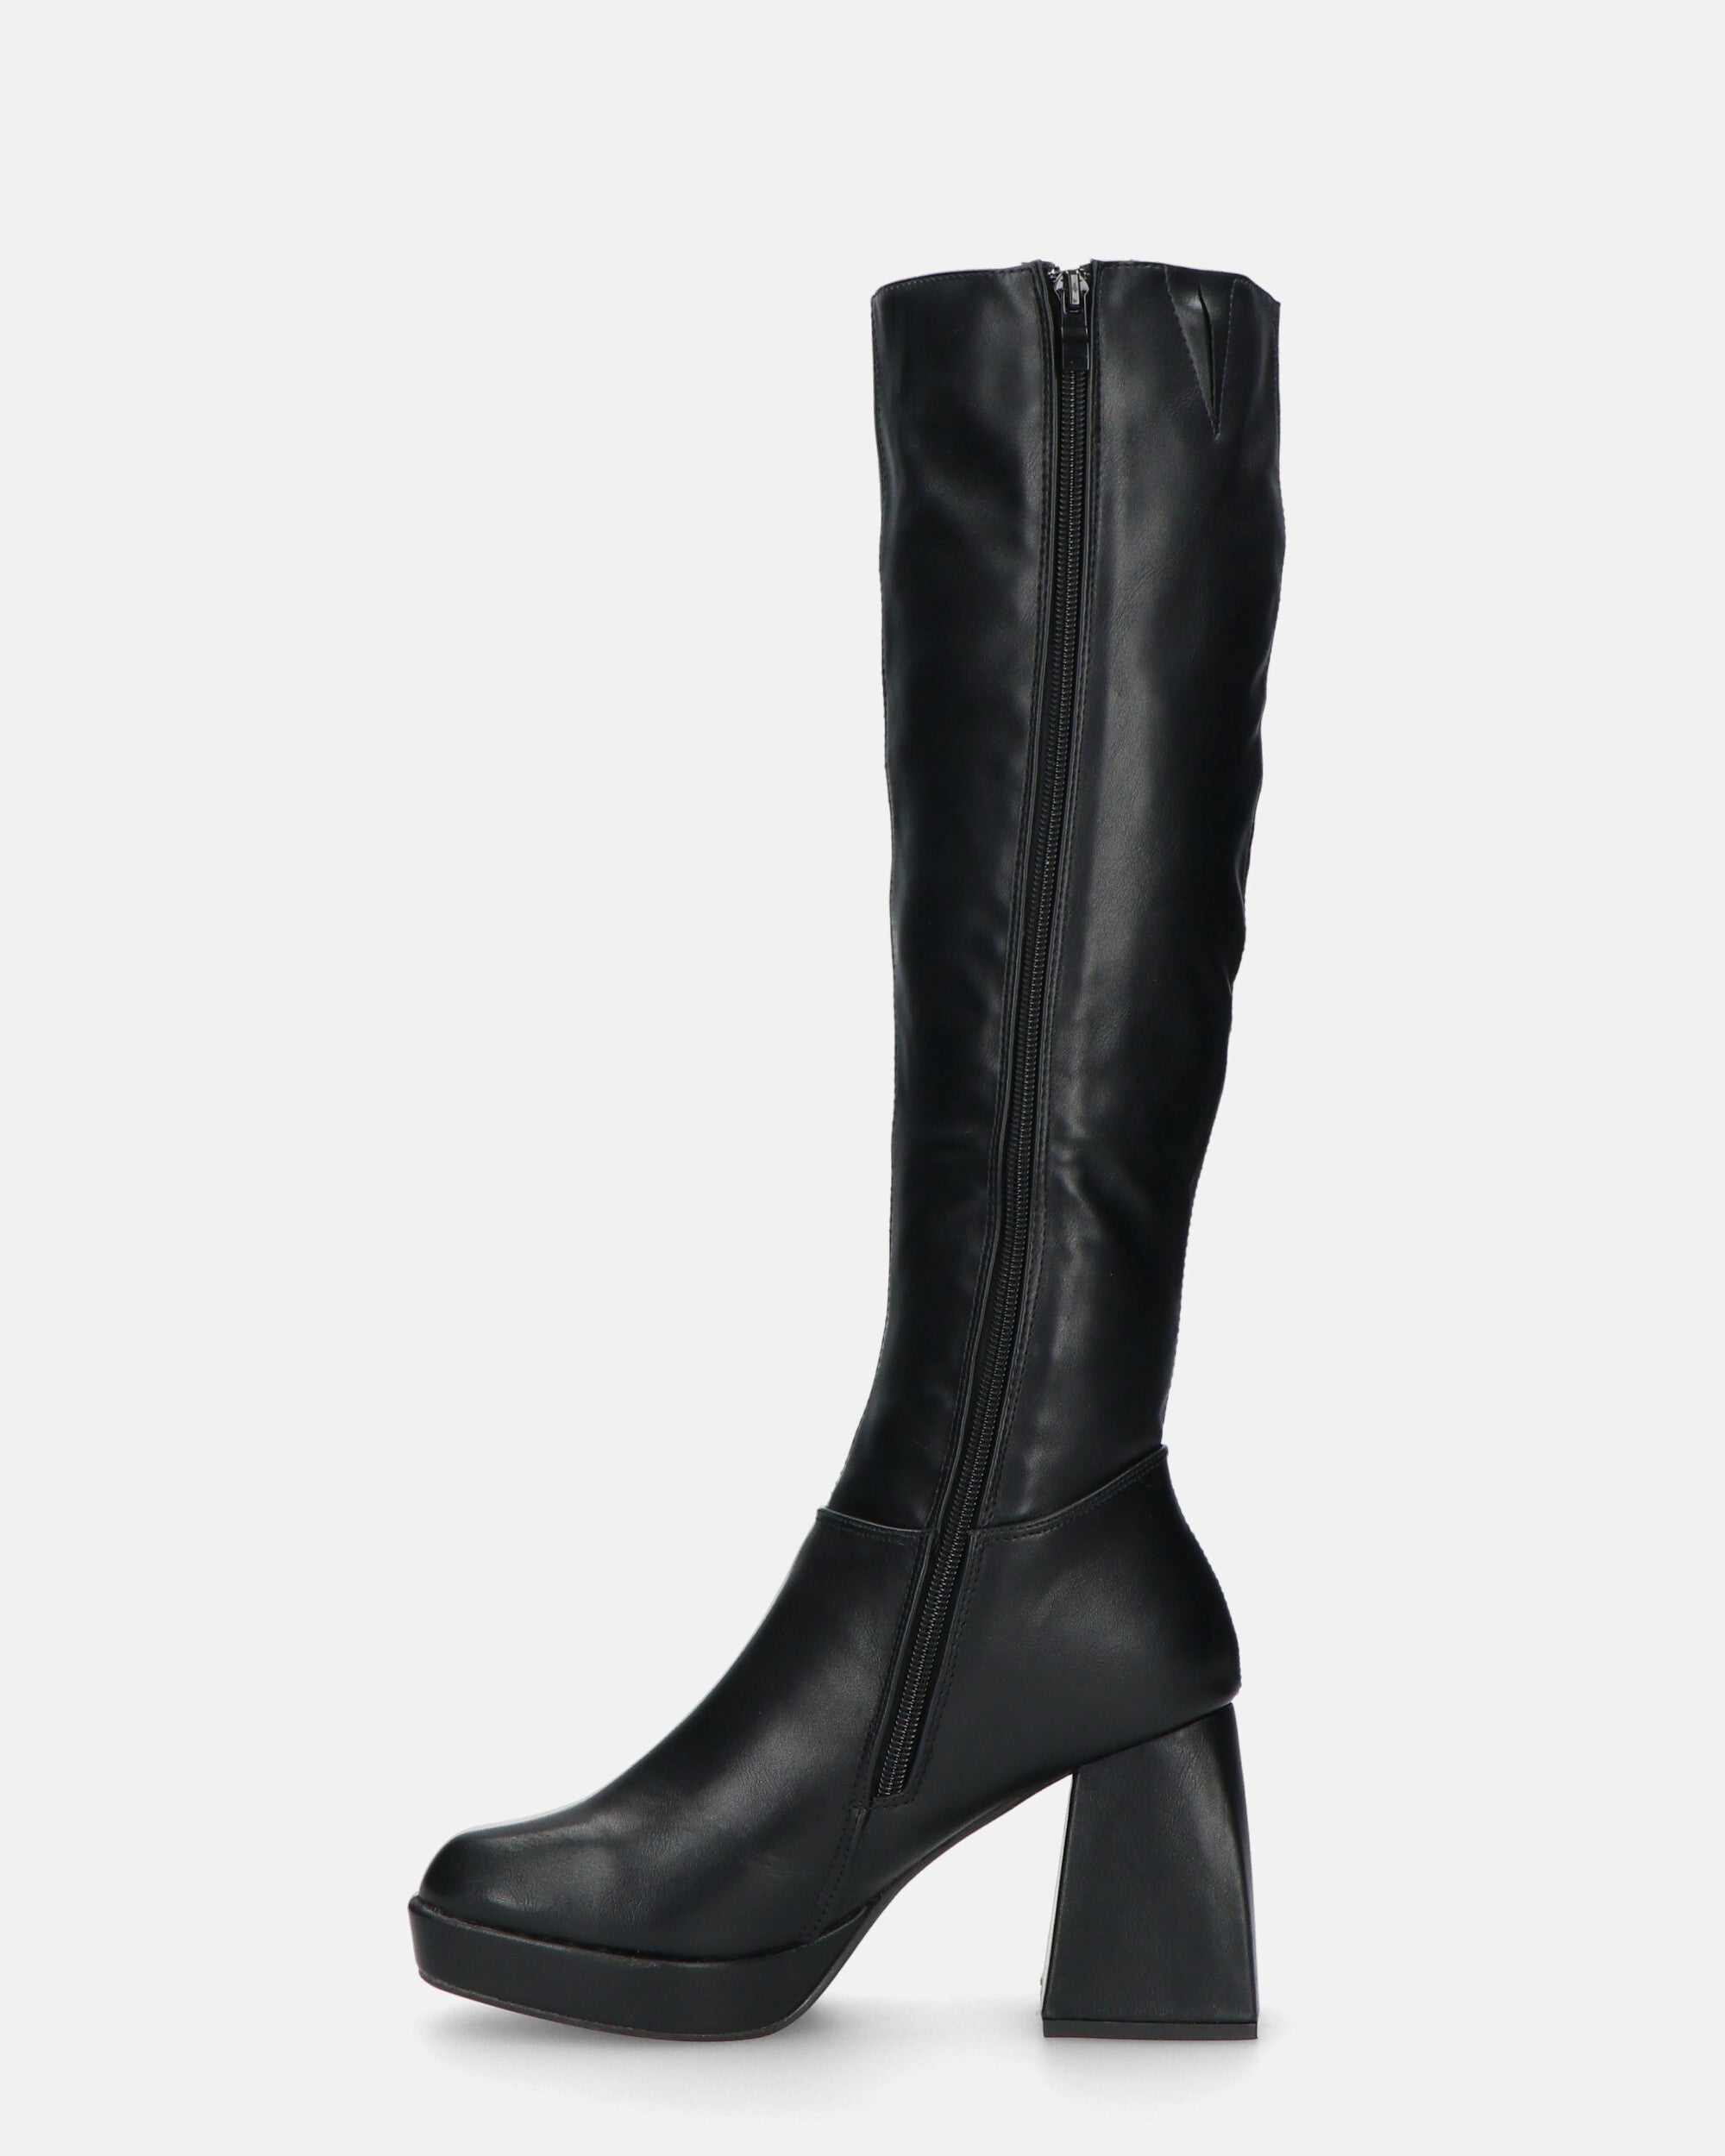 KATALIN - black high boots with square heel and side zip